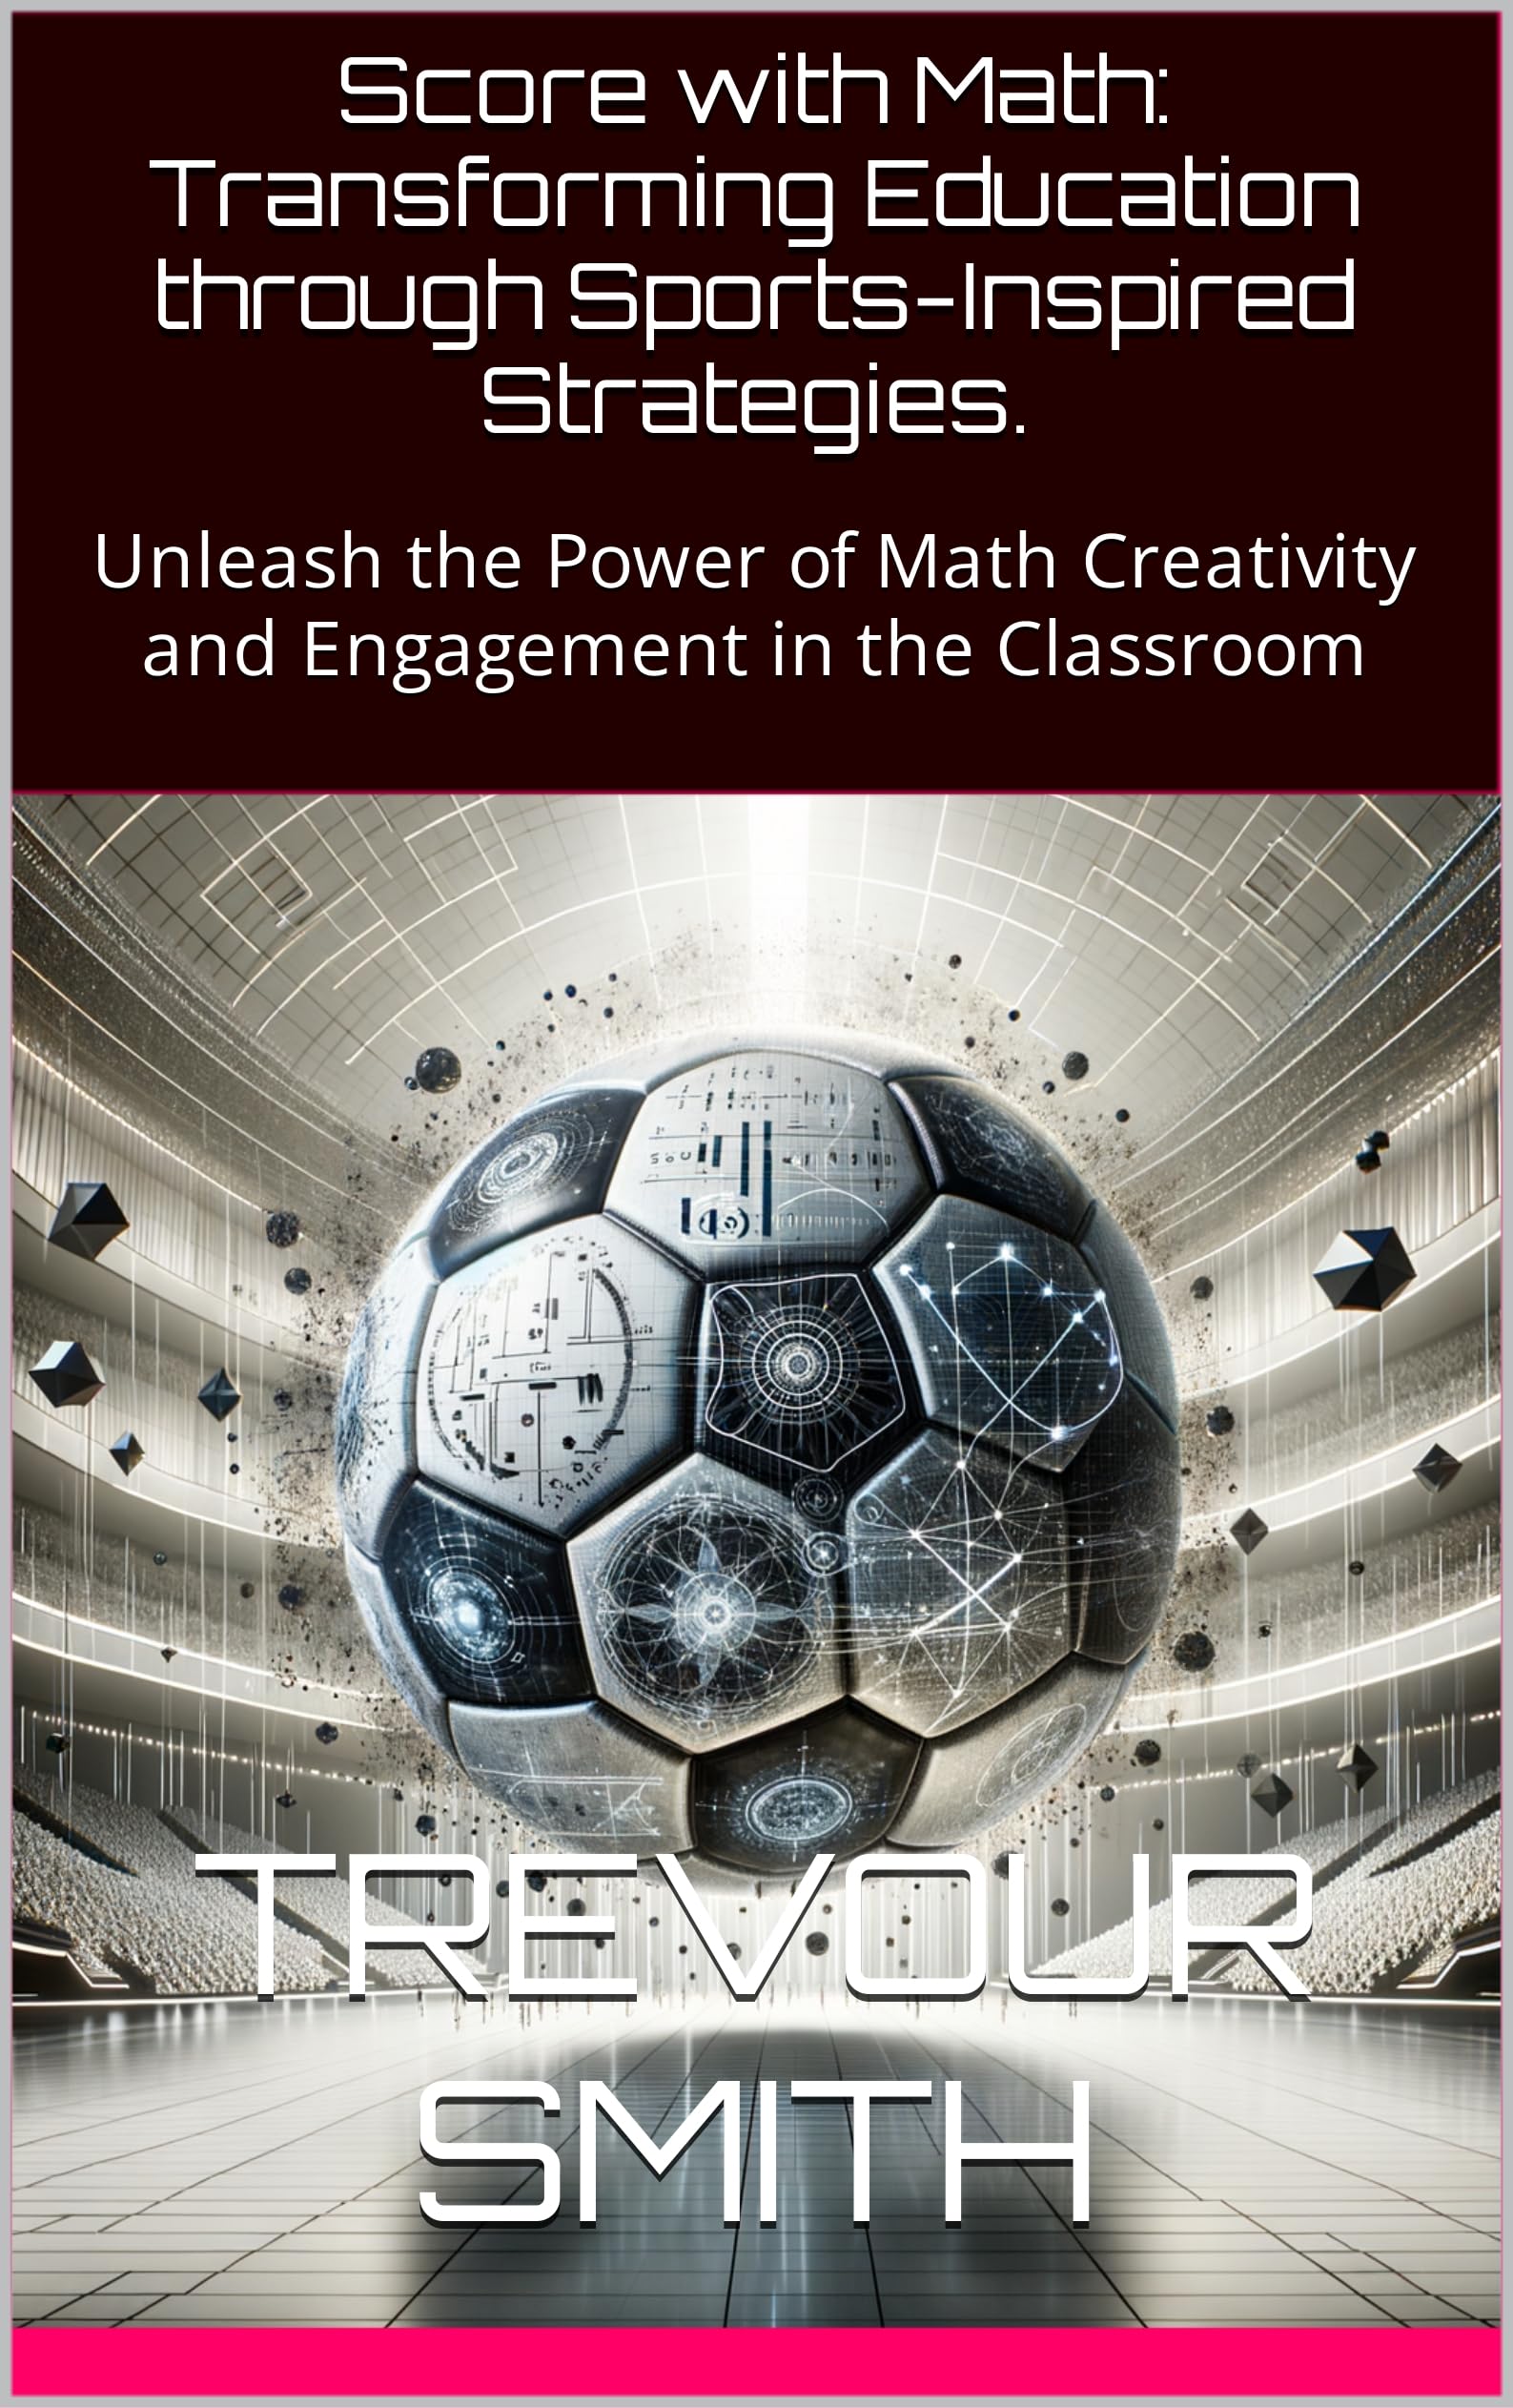 Score with Math: Transforming Education through Sports-Inspired Strategies.: Unleash the Power of Math Creativity and Engagement in the Classroom